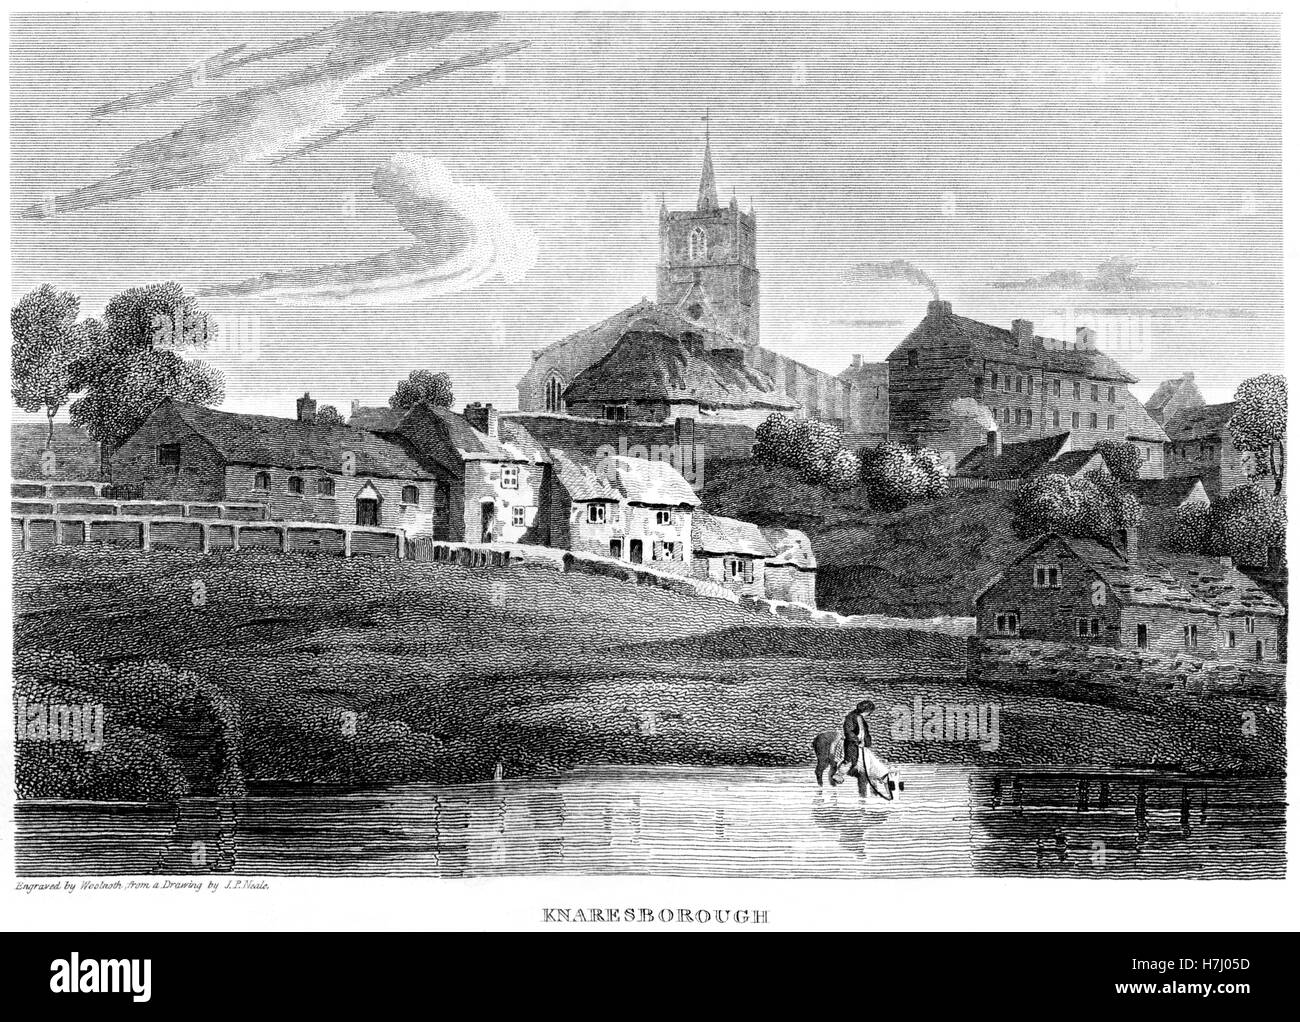 An engraving of Knaresborough, Yorkshire scanned at high resolution from a book printed in 1812. Believed copyright free. Stock Photo